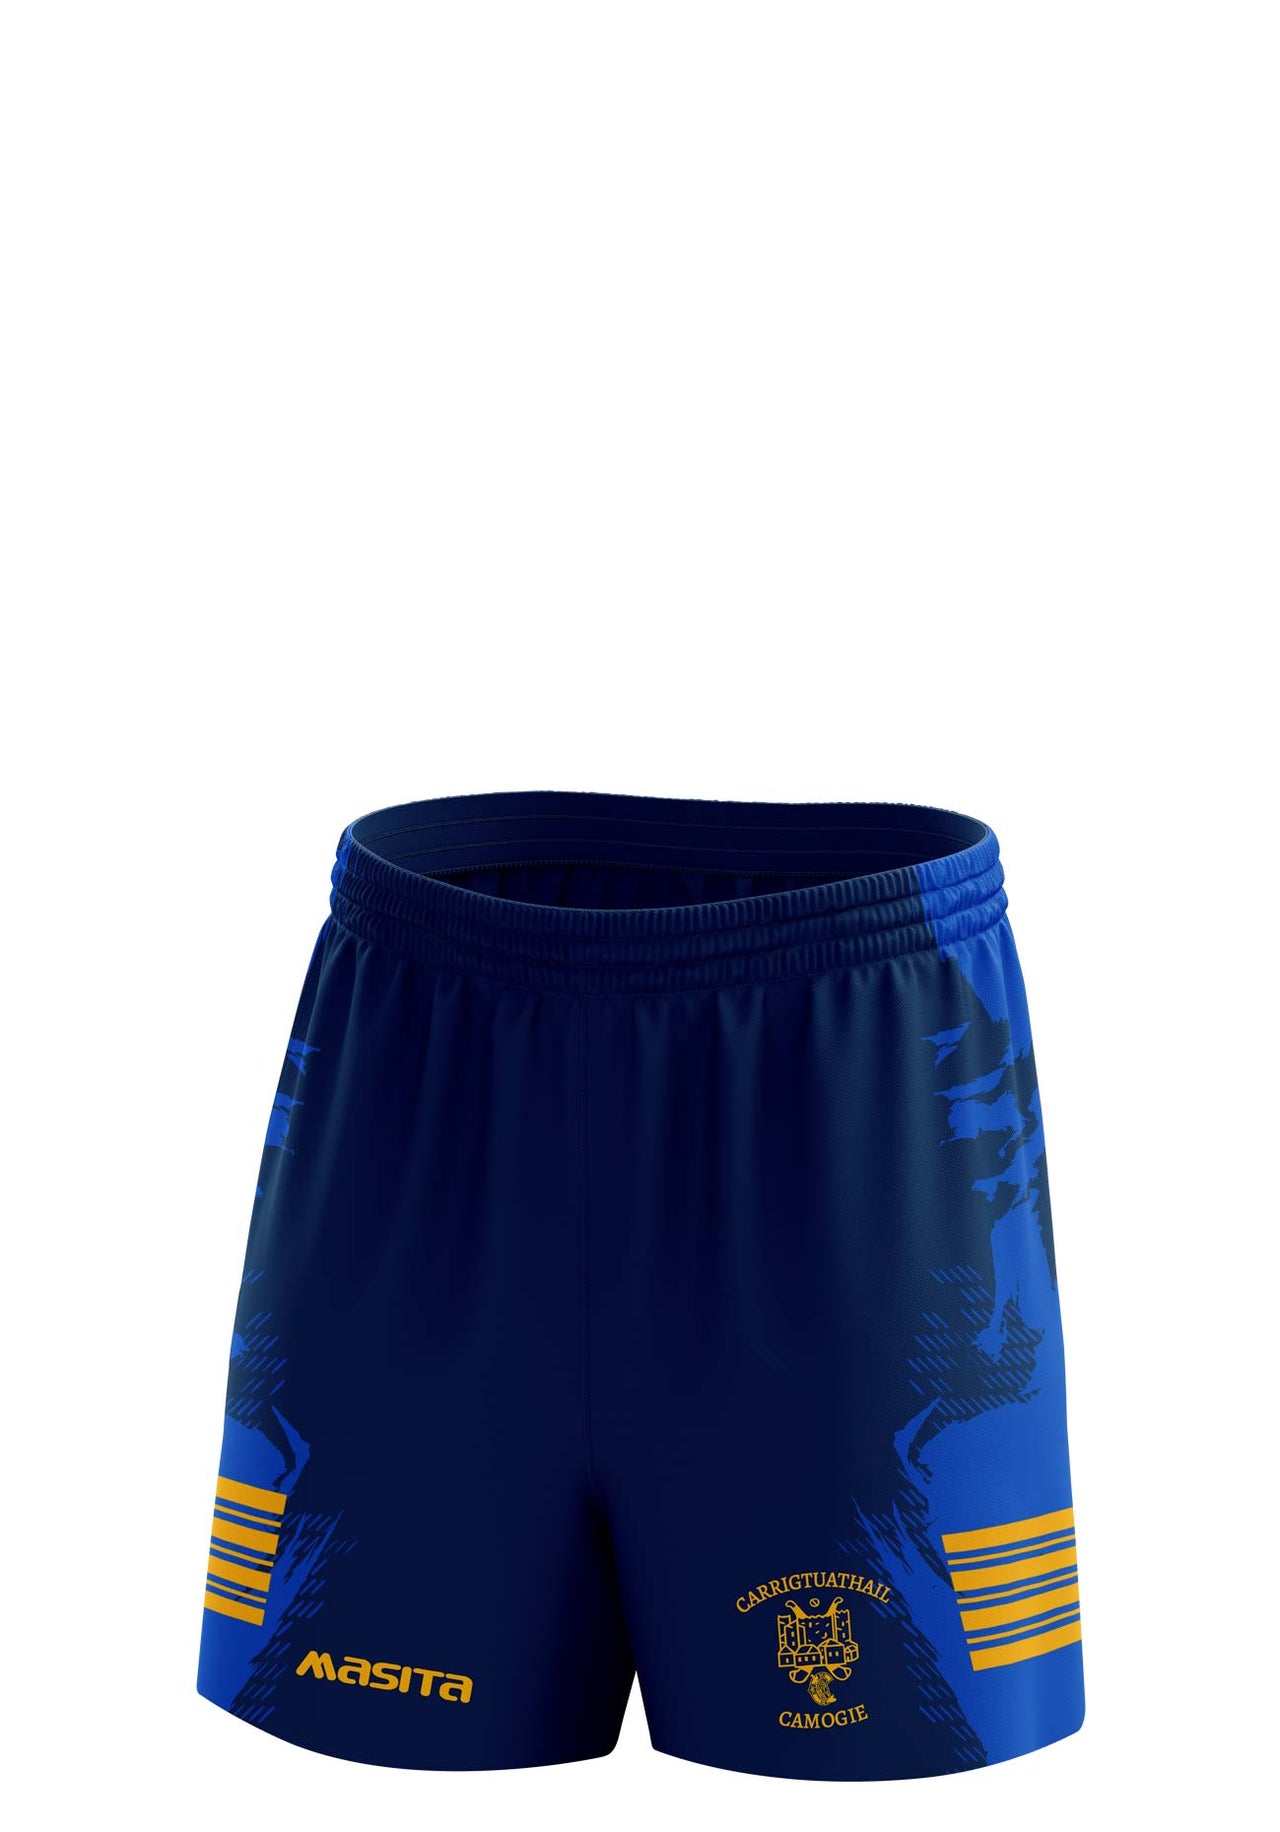 Carrigtwohill Camogie Training Shorts Kids